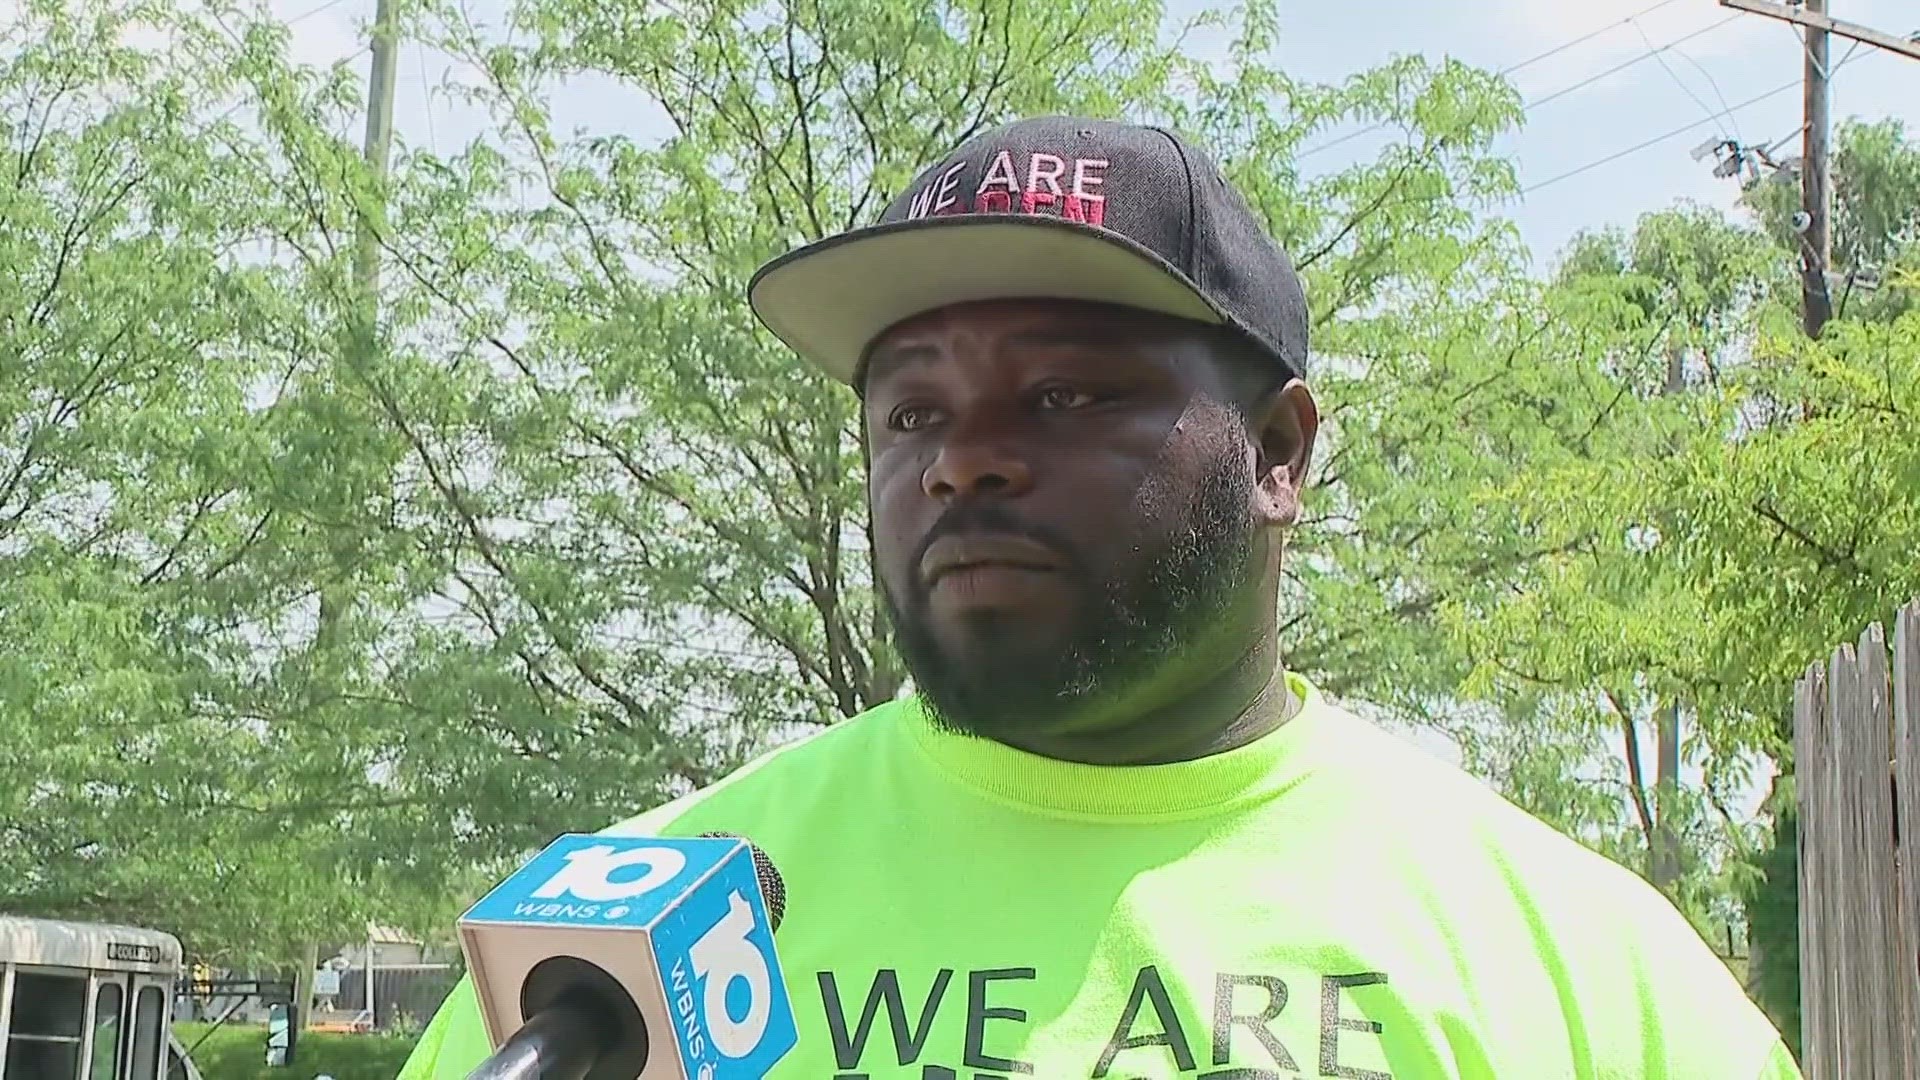 Community activist Ralph Carter said more needs to be done to combat gun violence.